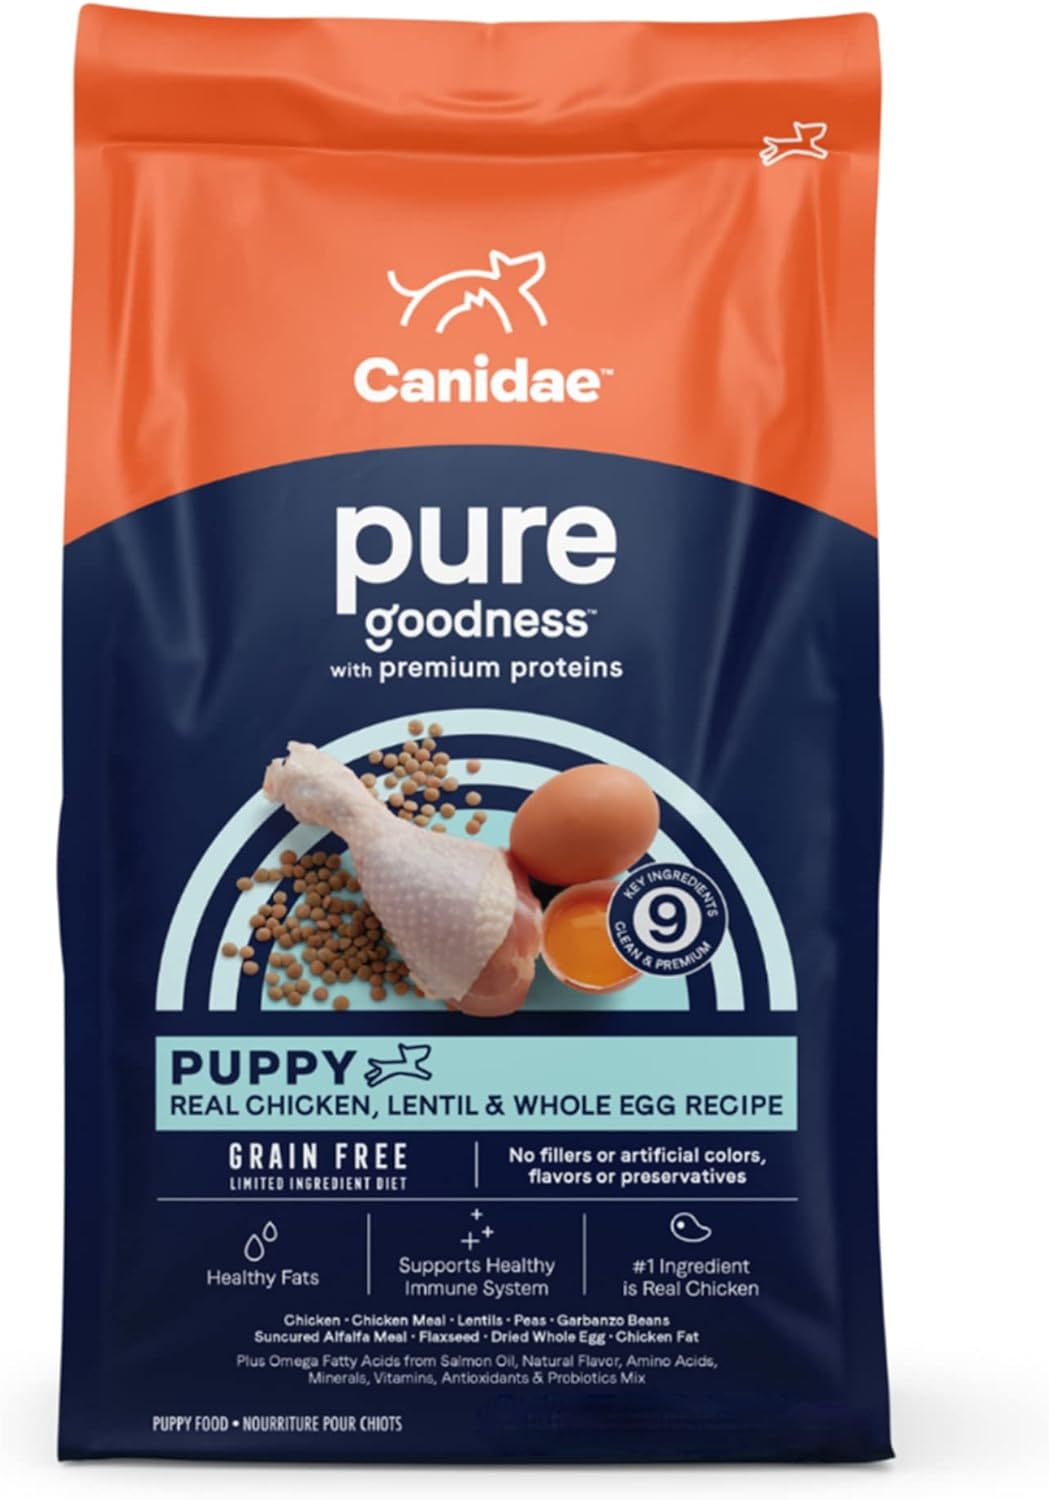 Canidae Pure PUPPY Real Chicken, Lentil & Whole Egg Recipe Dry Dog 12 LB